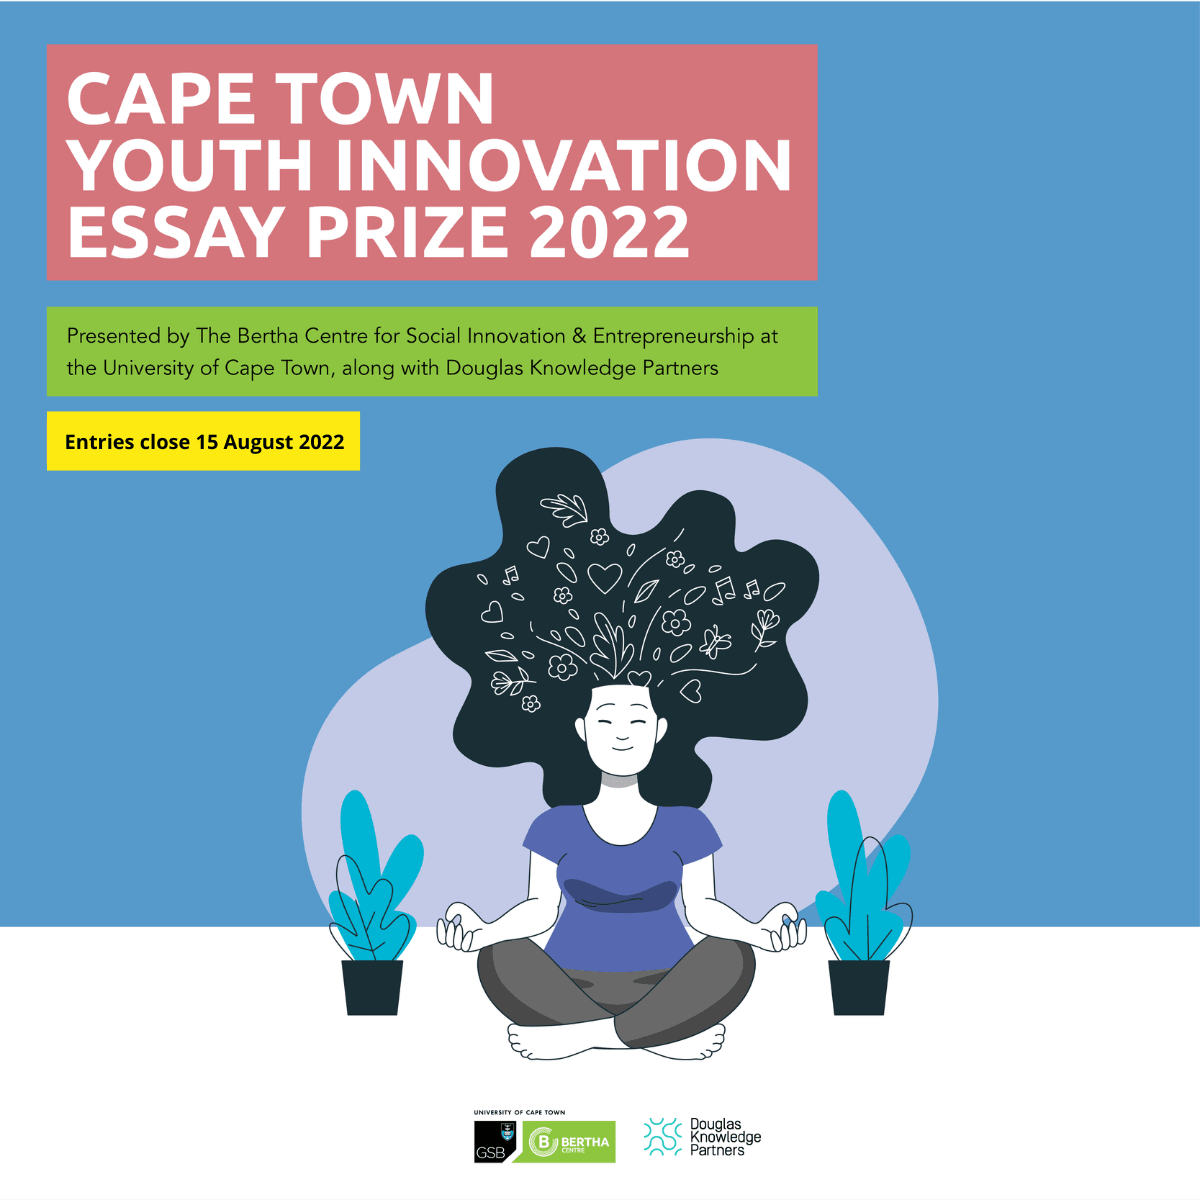 Cape Town Youth Innovation Essay Prize 2022